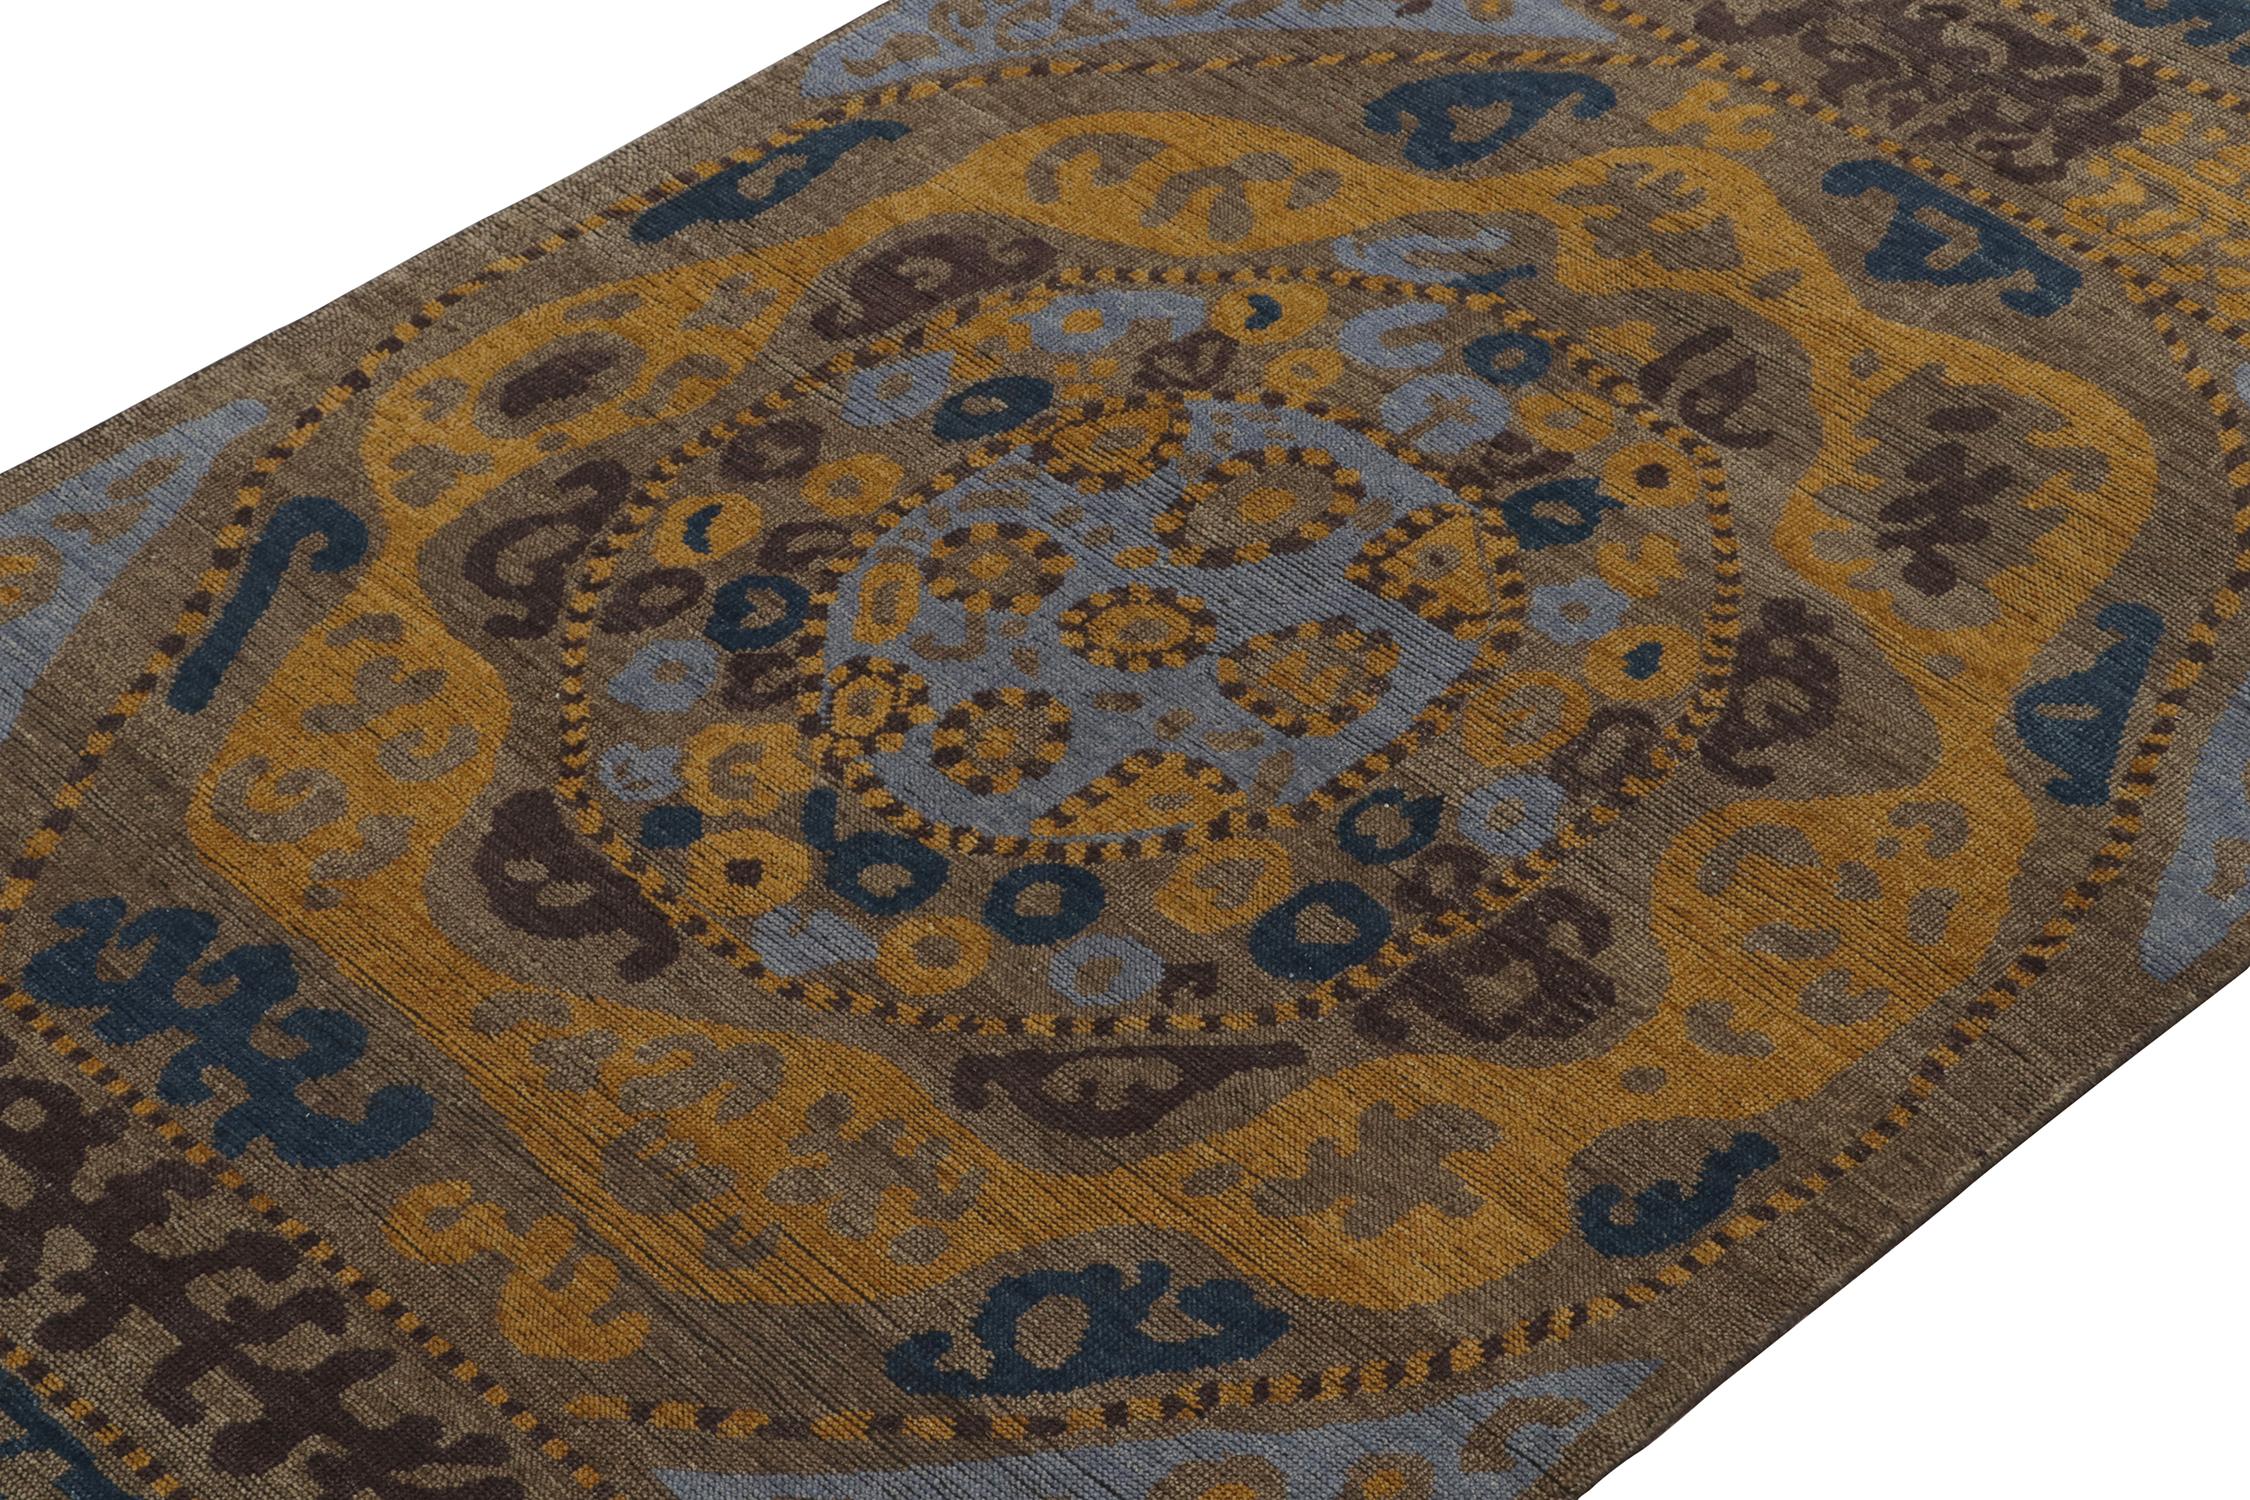 Hand-Knotted Rug & Kilim’s Tribal Inspired Rug in Blue, Brown, Gold Geometric Patterns For Sale